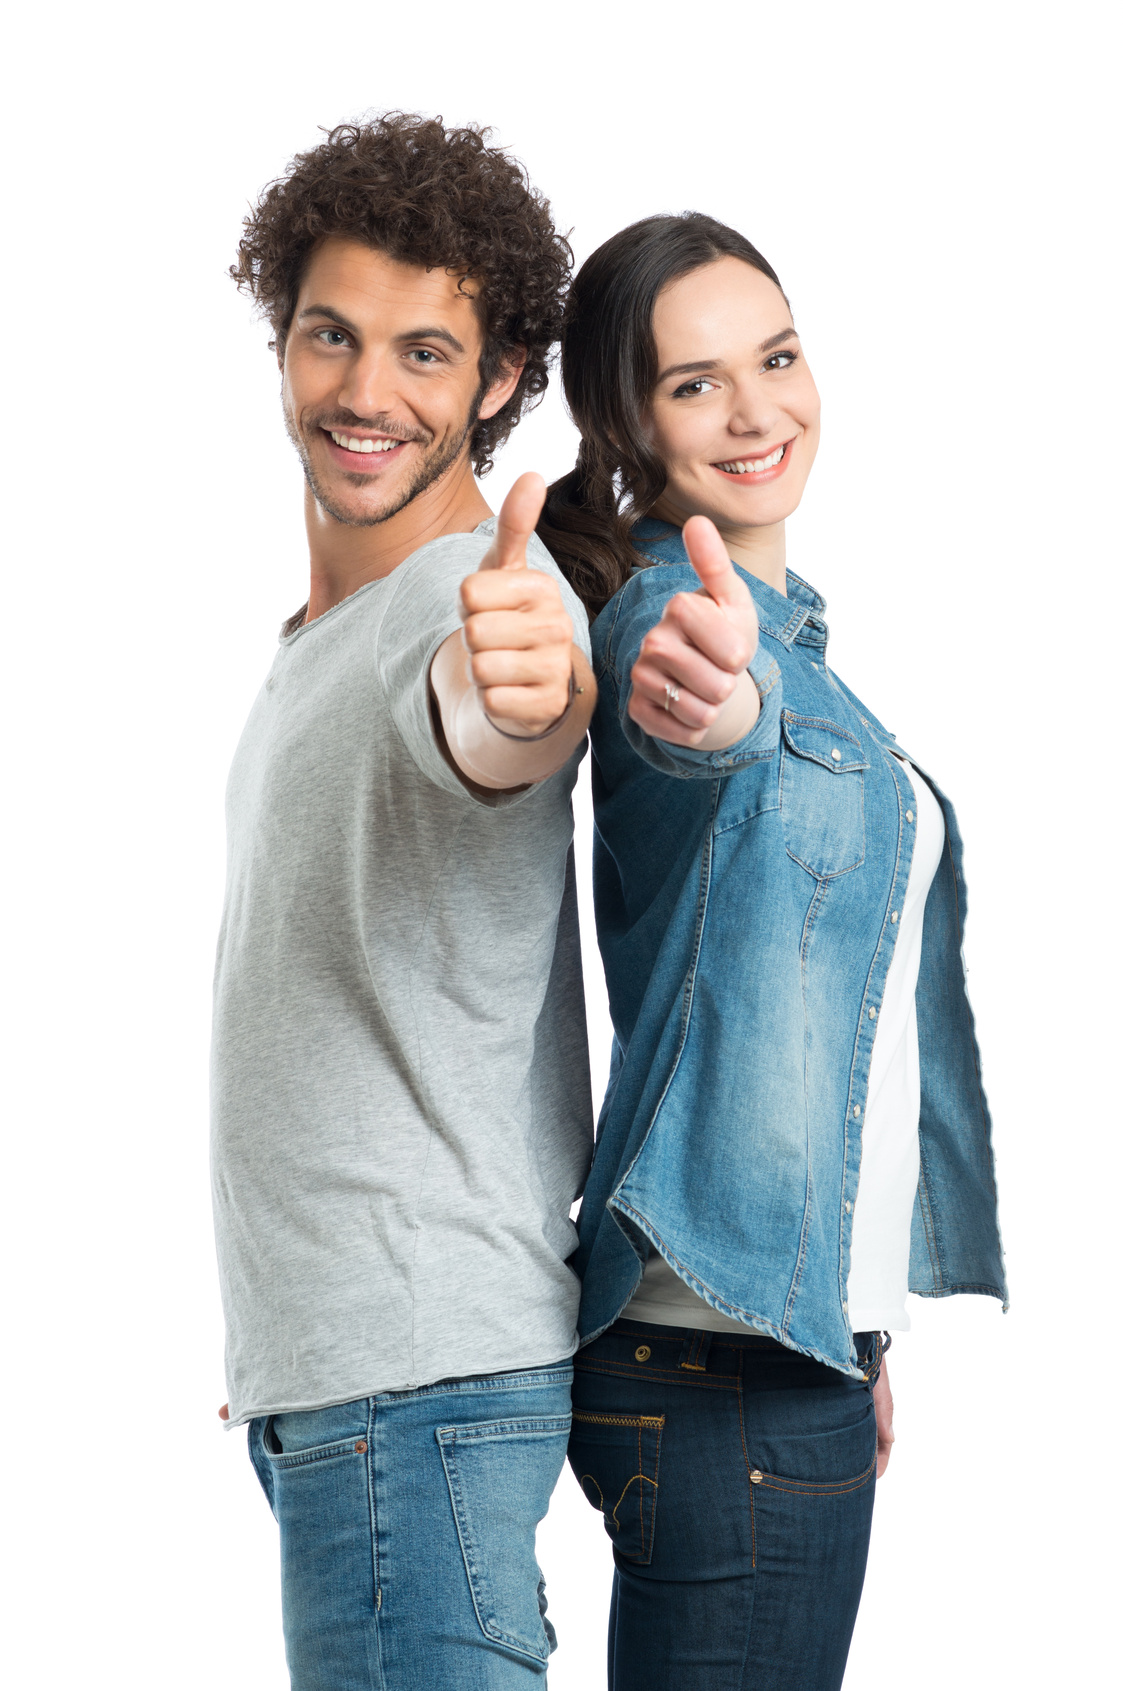 Young Couple Showing Thumb Up